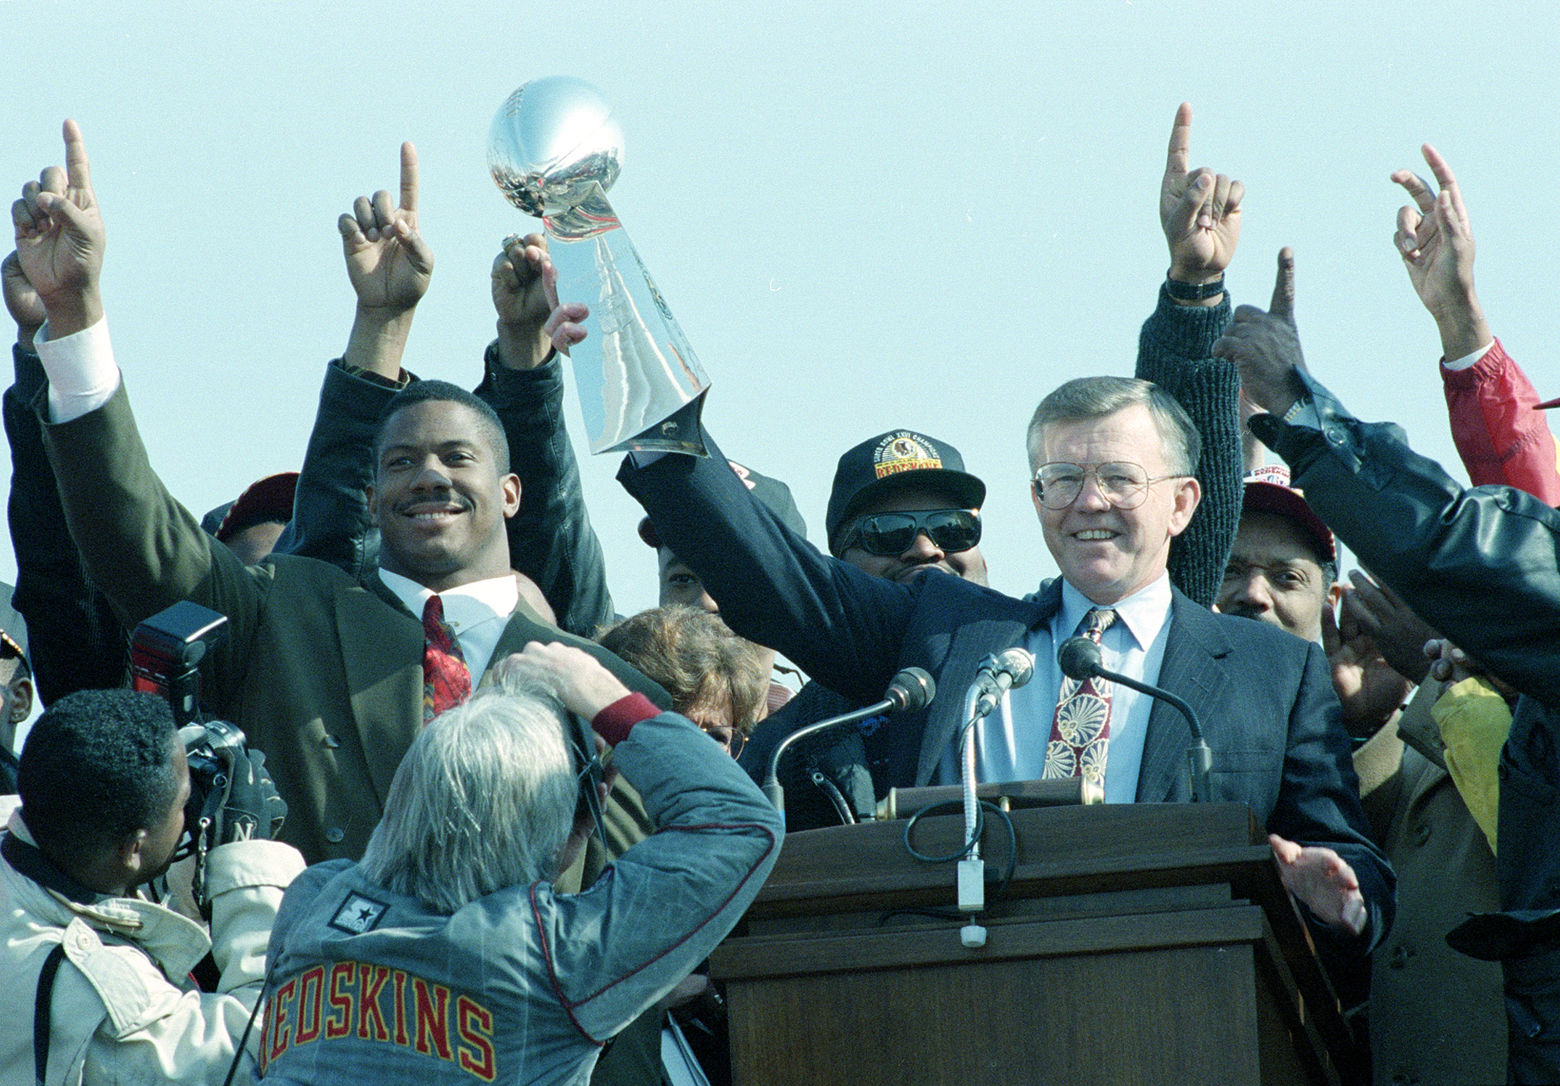 Washington Redskins coach Joe Gibbs, surrounded by his players, holds the Vince Lombardi trophy during a rally for the Super Bowl champions on the Mall in Washington, D.C., Jan. 28, 1992. The Redskins defeated the Buffalo Bills in the Super Bowl XXVI game, 37-24. Redskins linebacker Ravin Caldwell is at left. (AP Photo/Doug Mills)